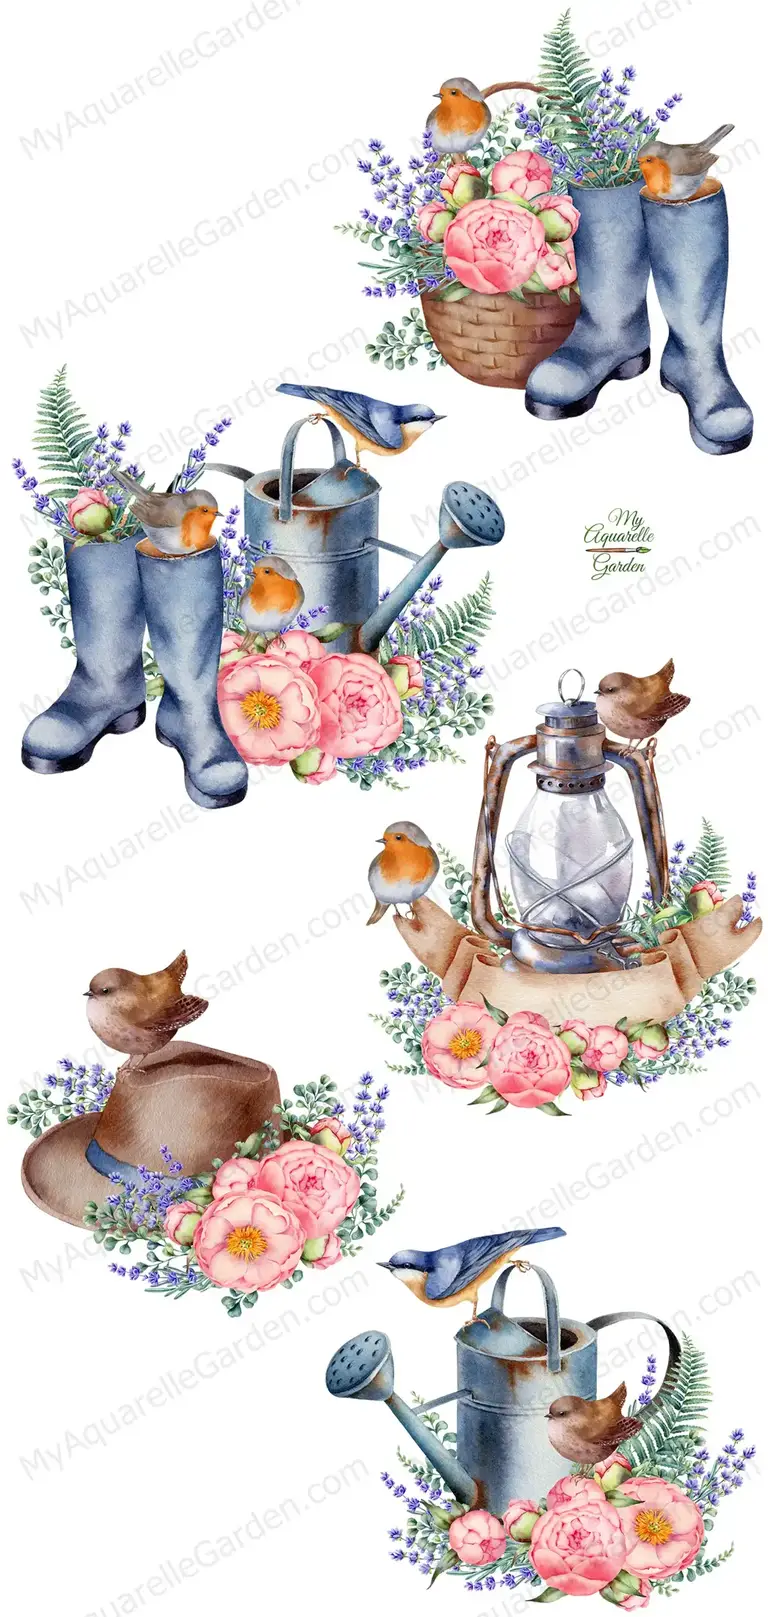 Garden life. Flowers, gardening tools. Watercolor hand-painted clipart.